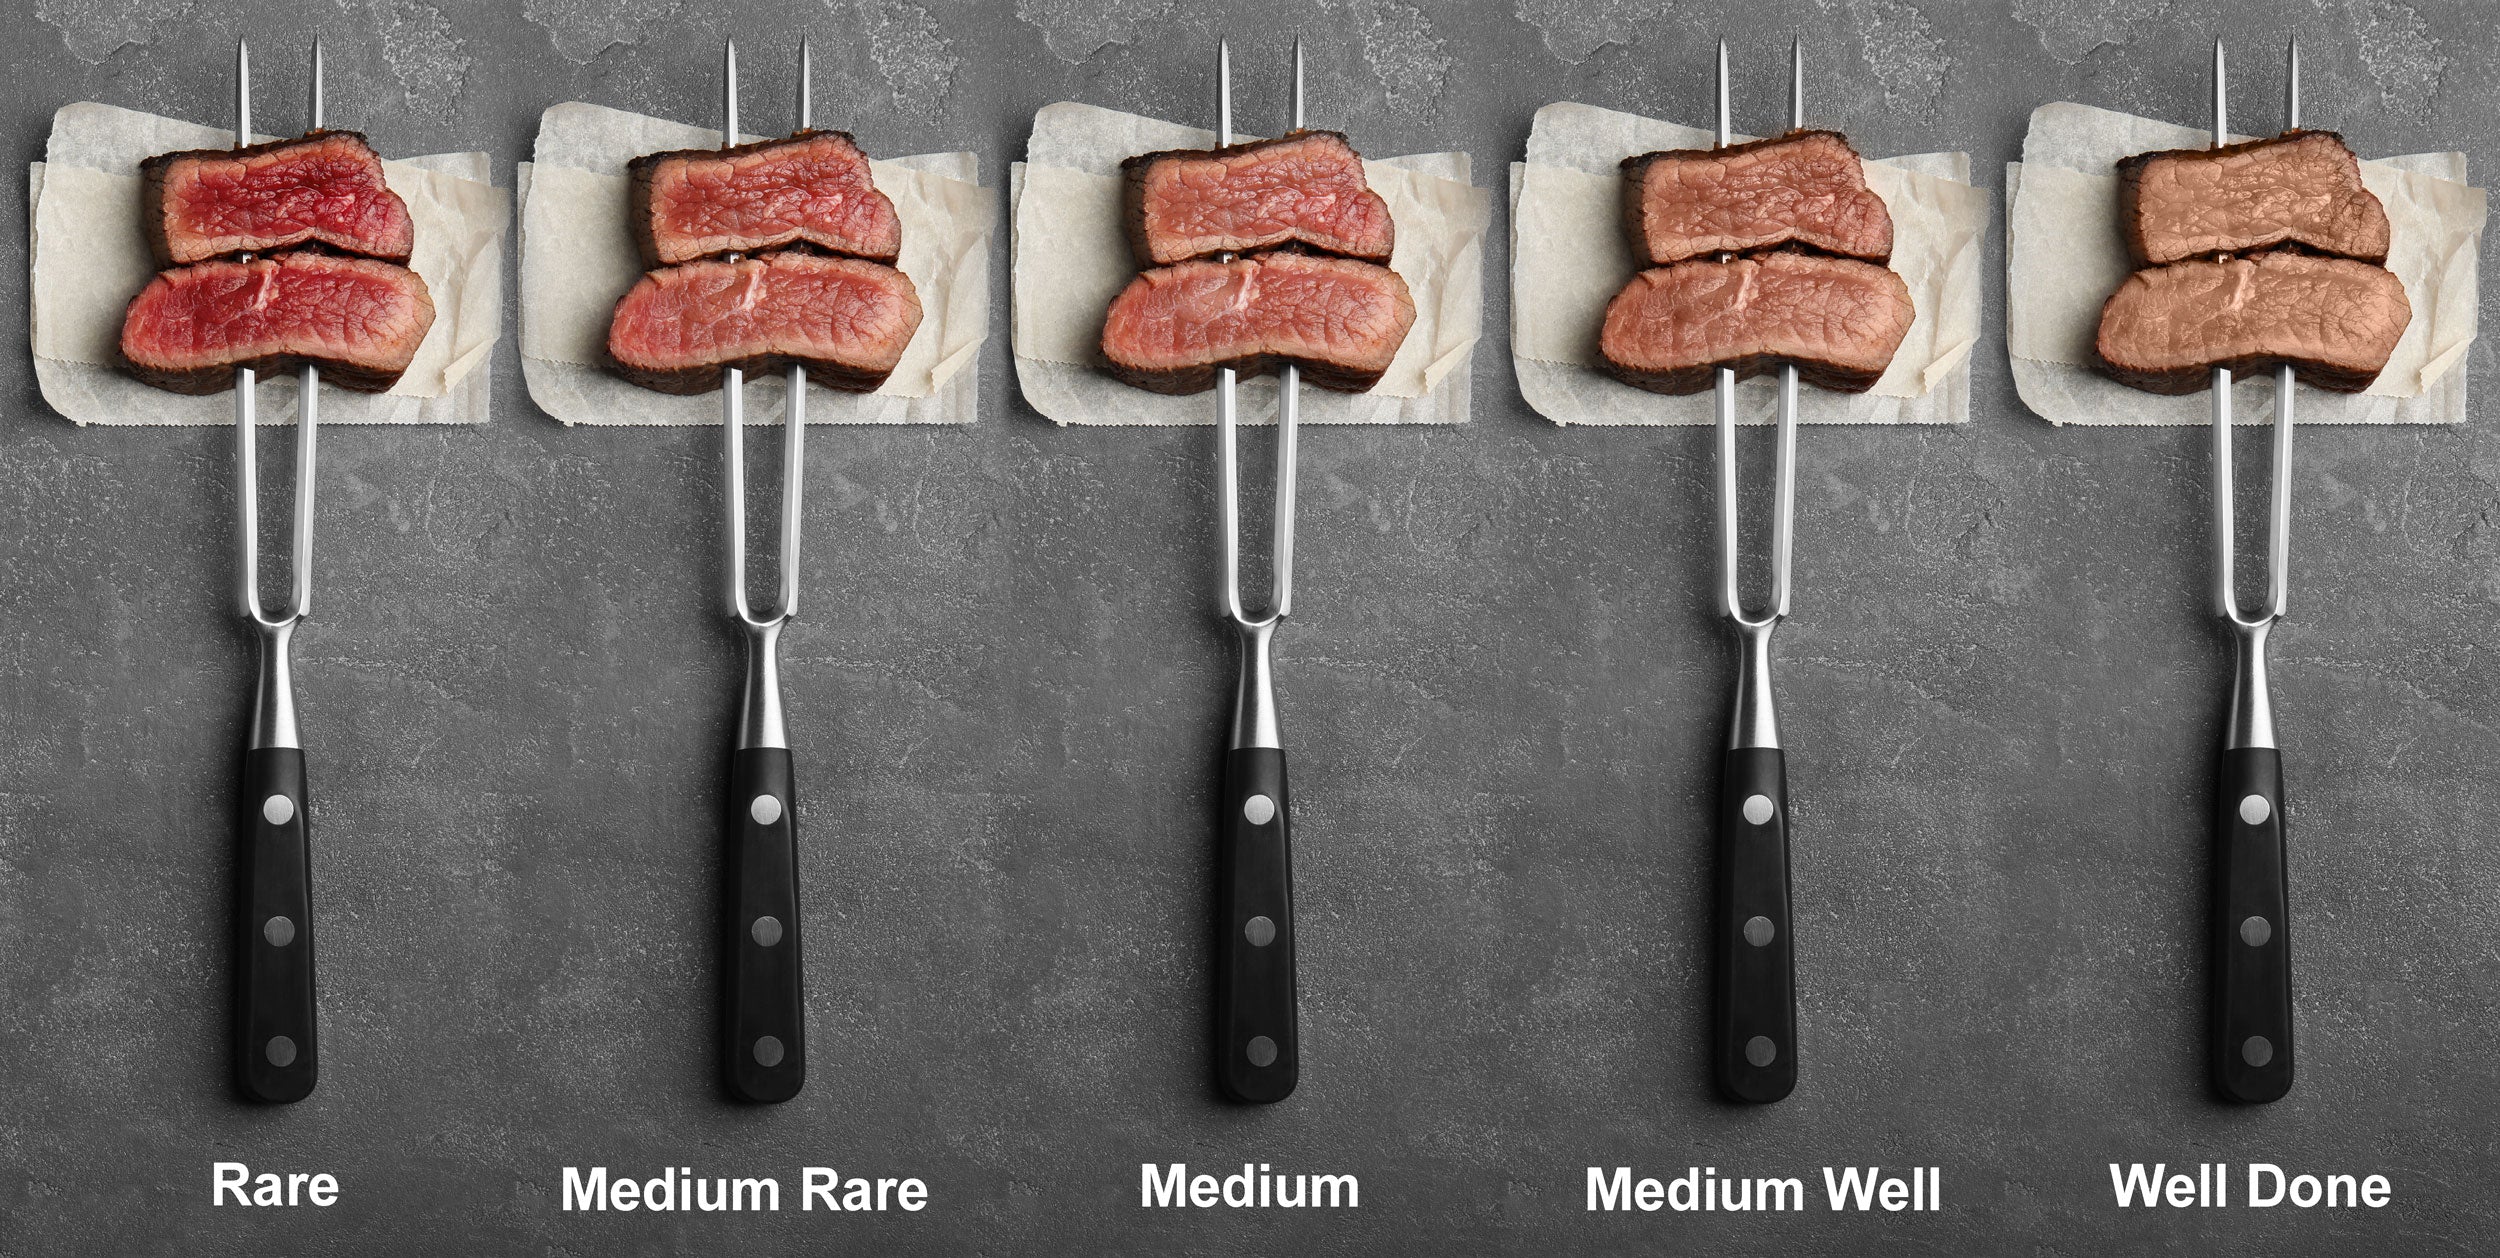 Cooking Meat? Check the New Recommended Temperatures